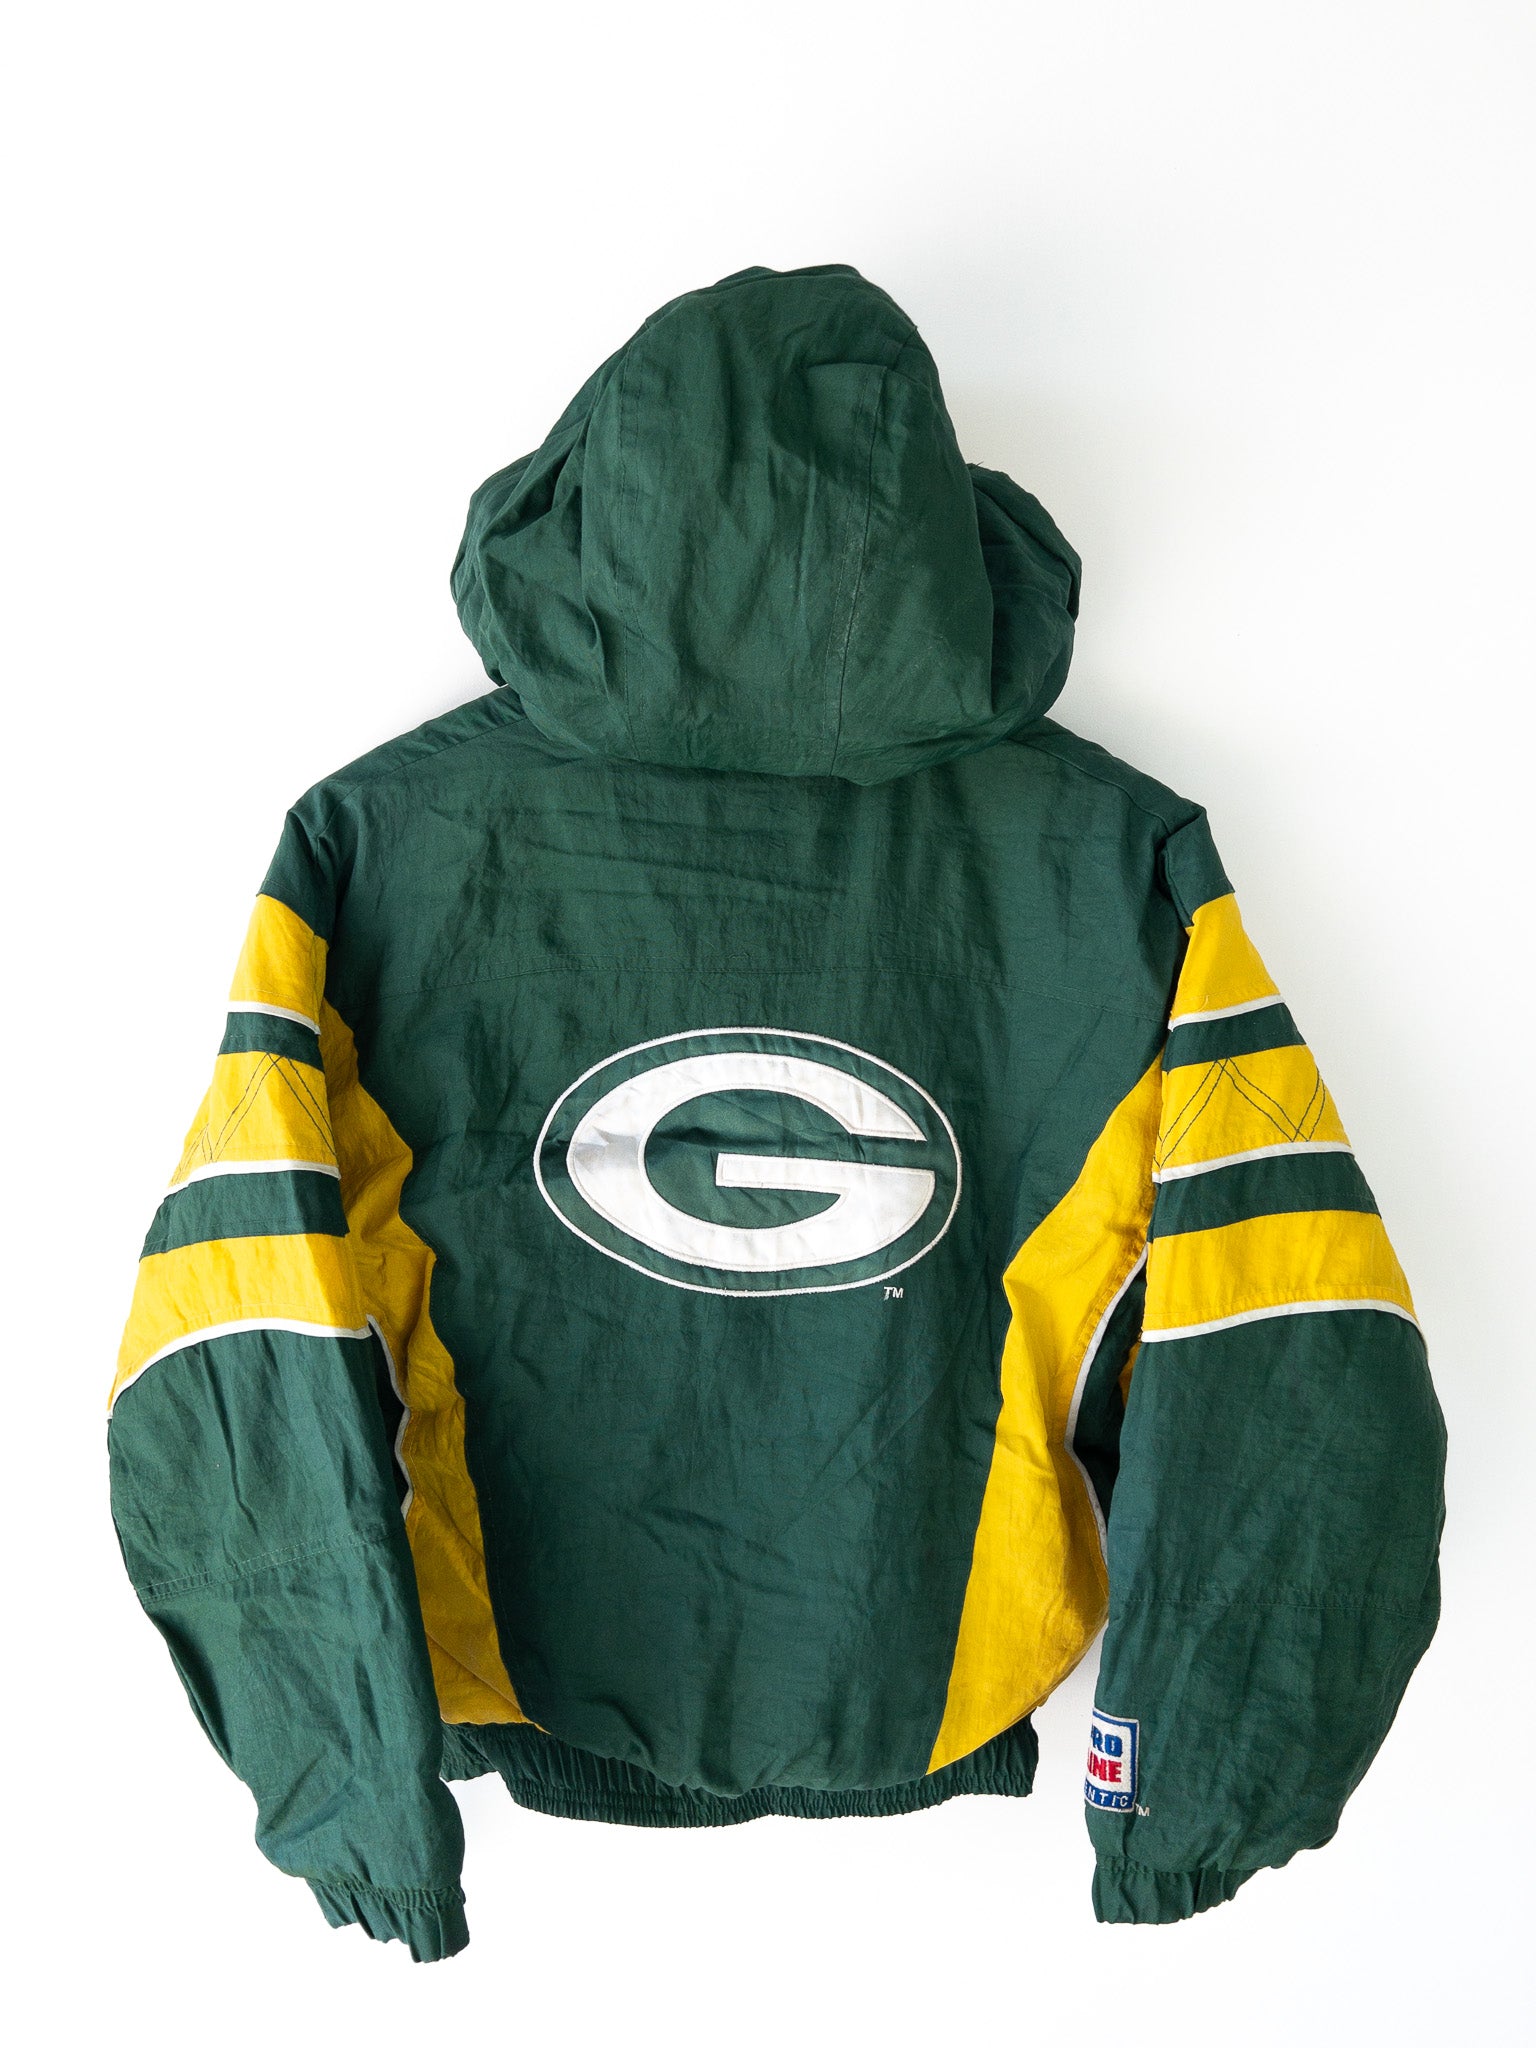 Vintage Green Bay Packers Jacket (XS)